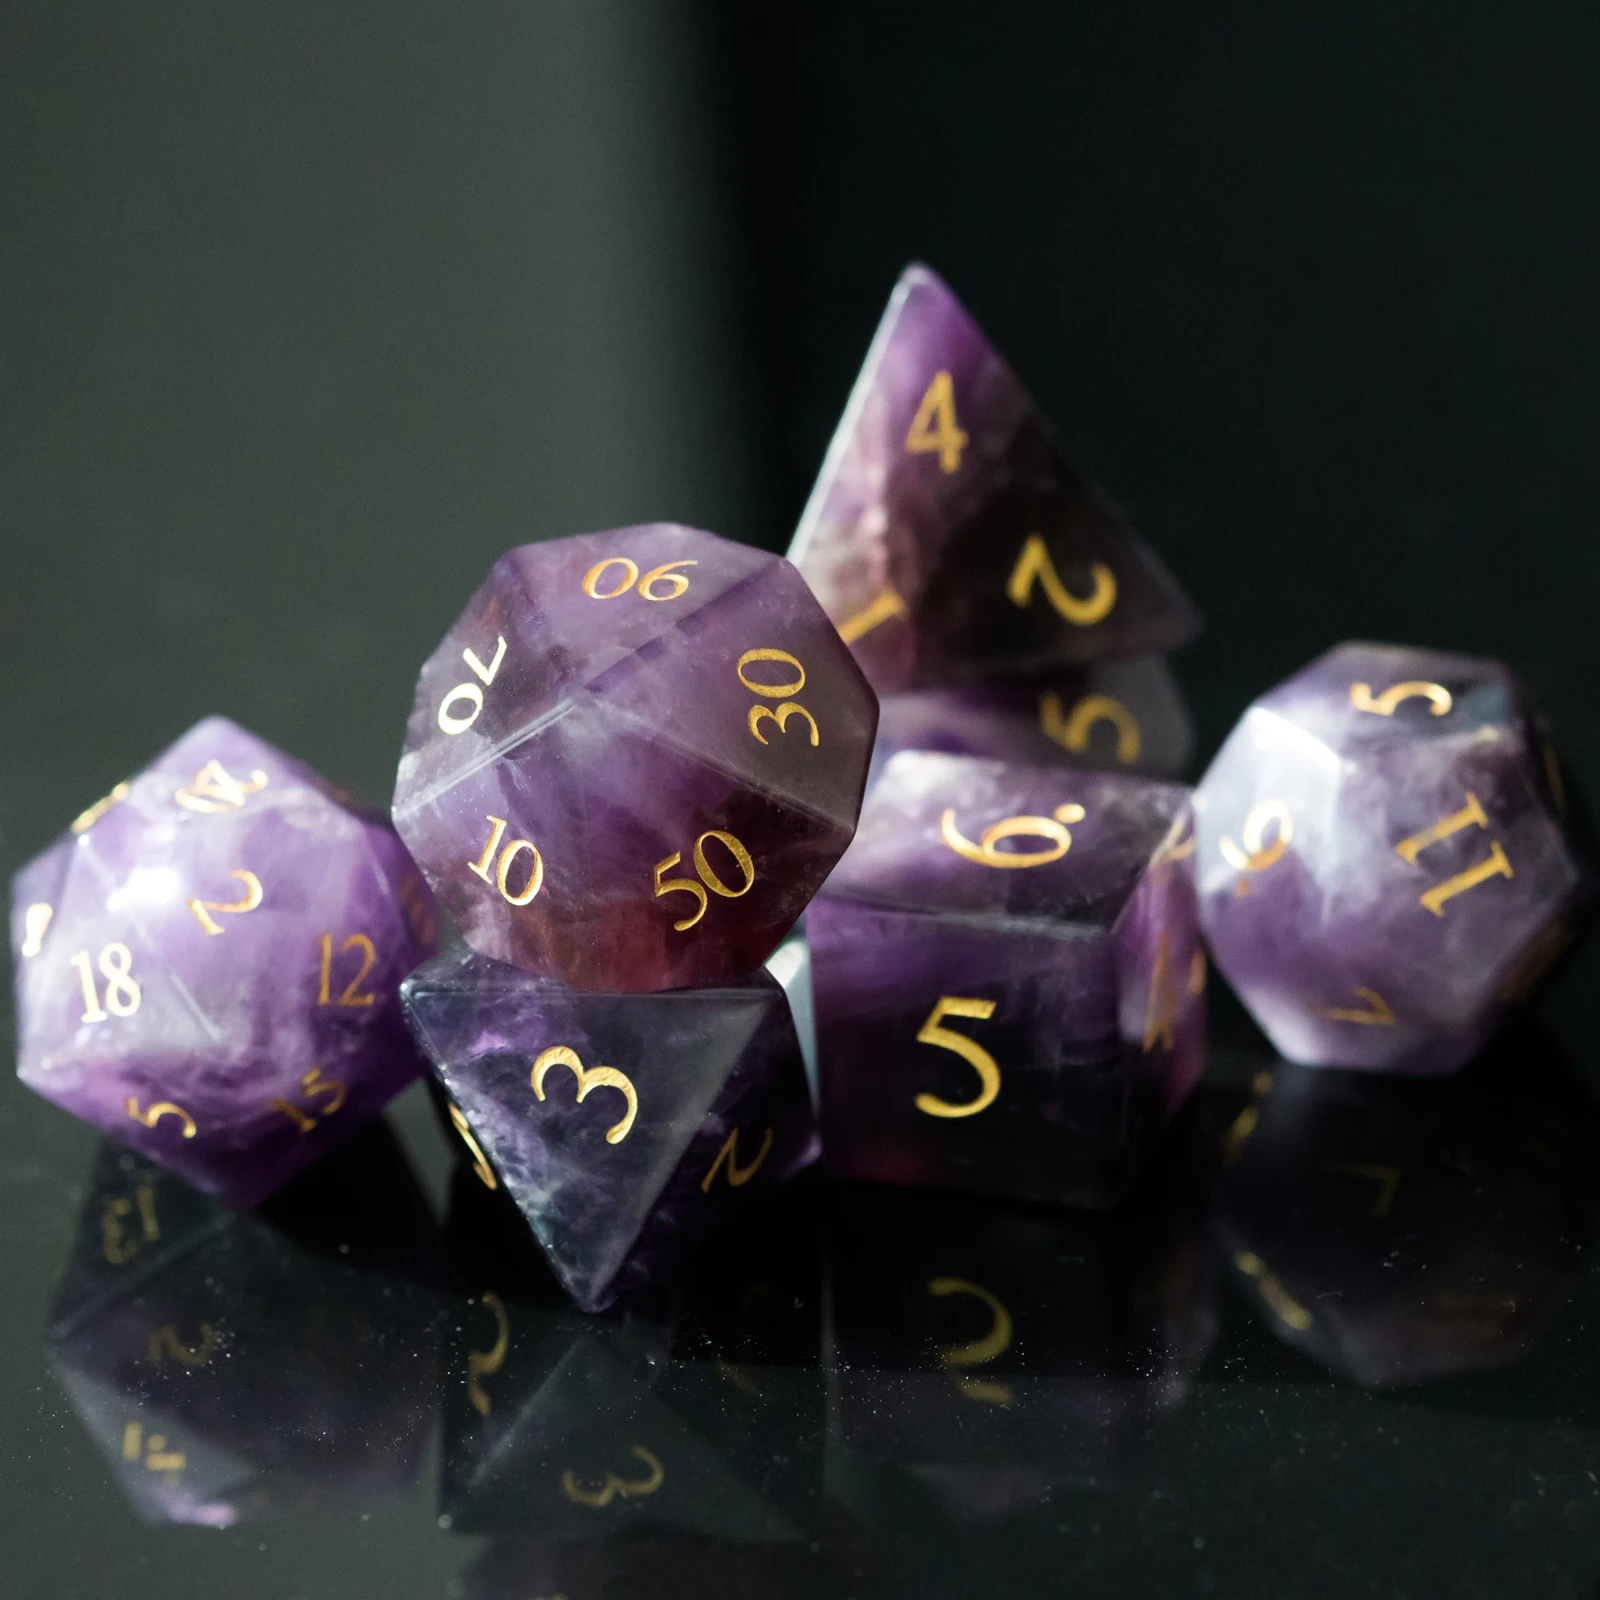 Cusdie Set of 7 Handmade Amethyst Dice, 16mm Polyhedral Stone Dice Set with Leather Box, D&D Dices for Collection